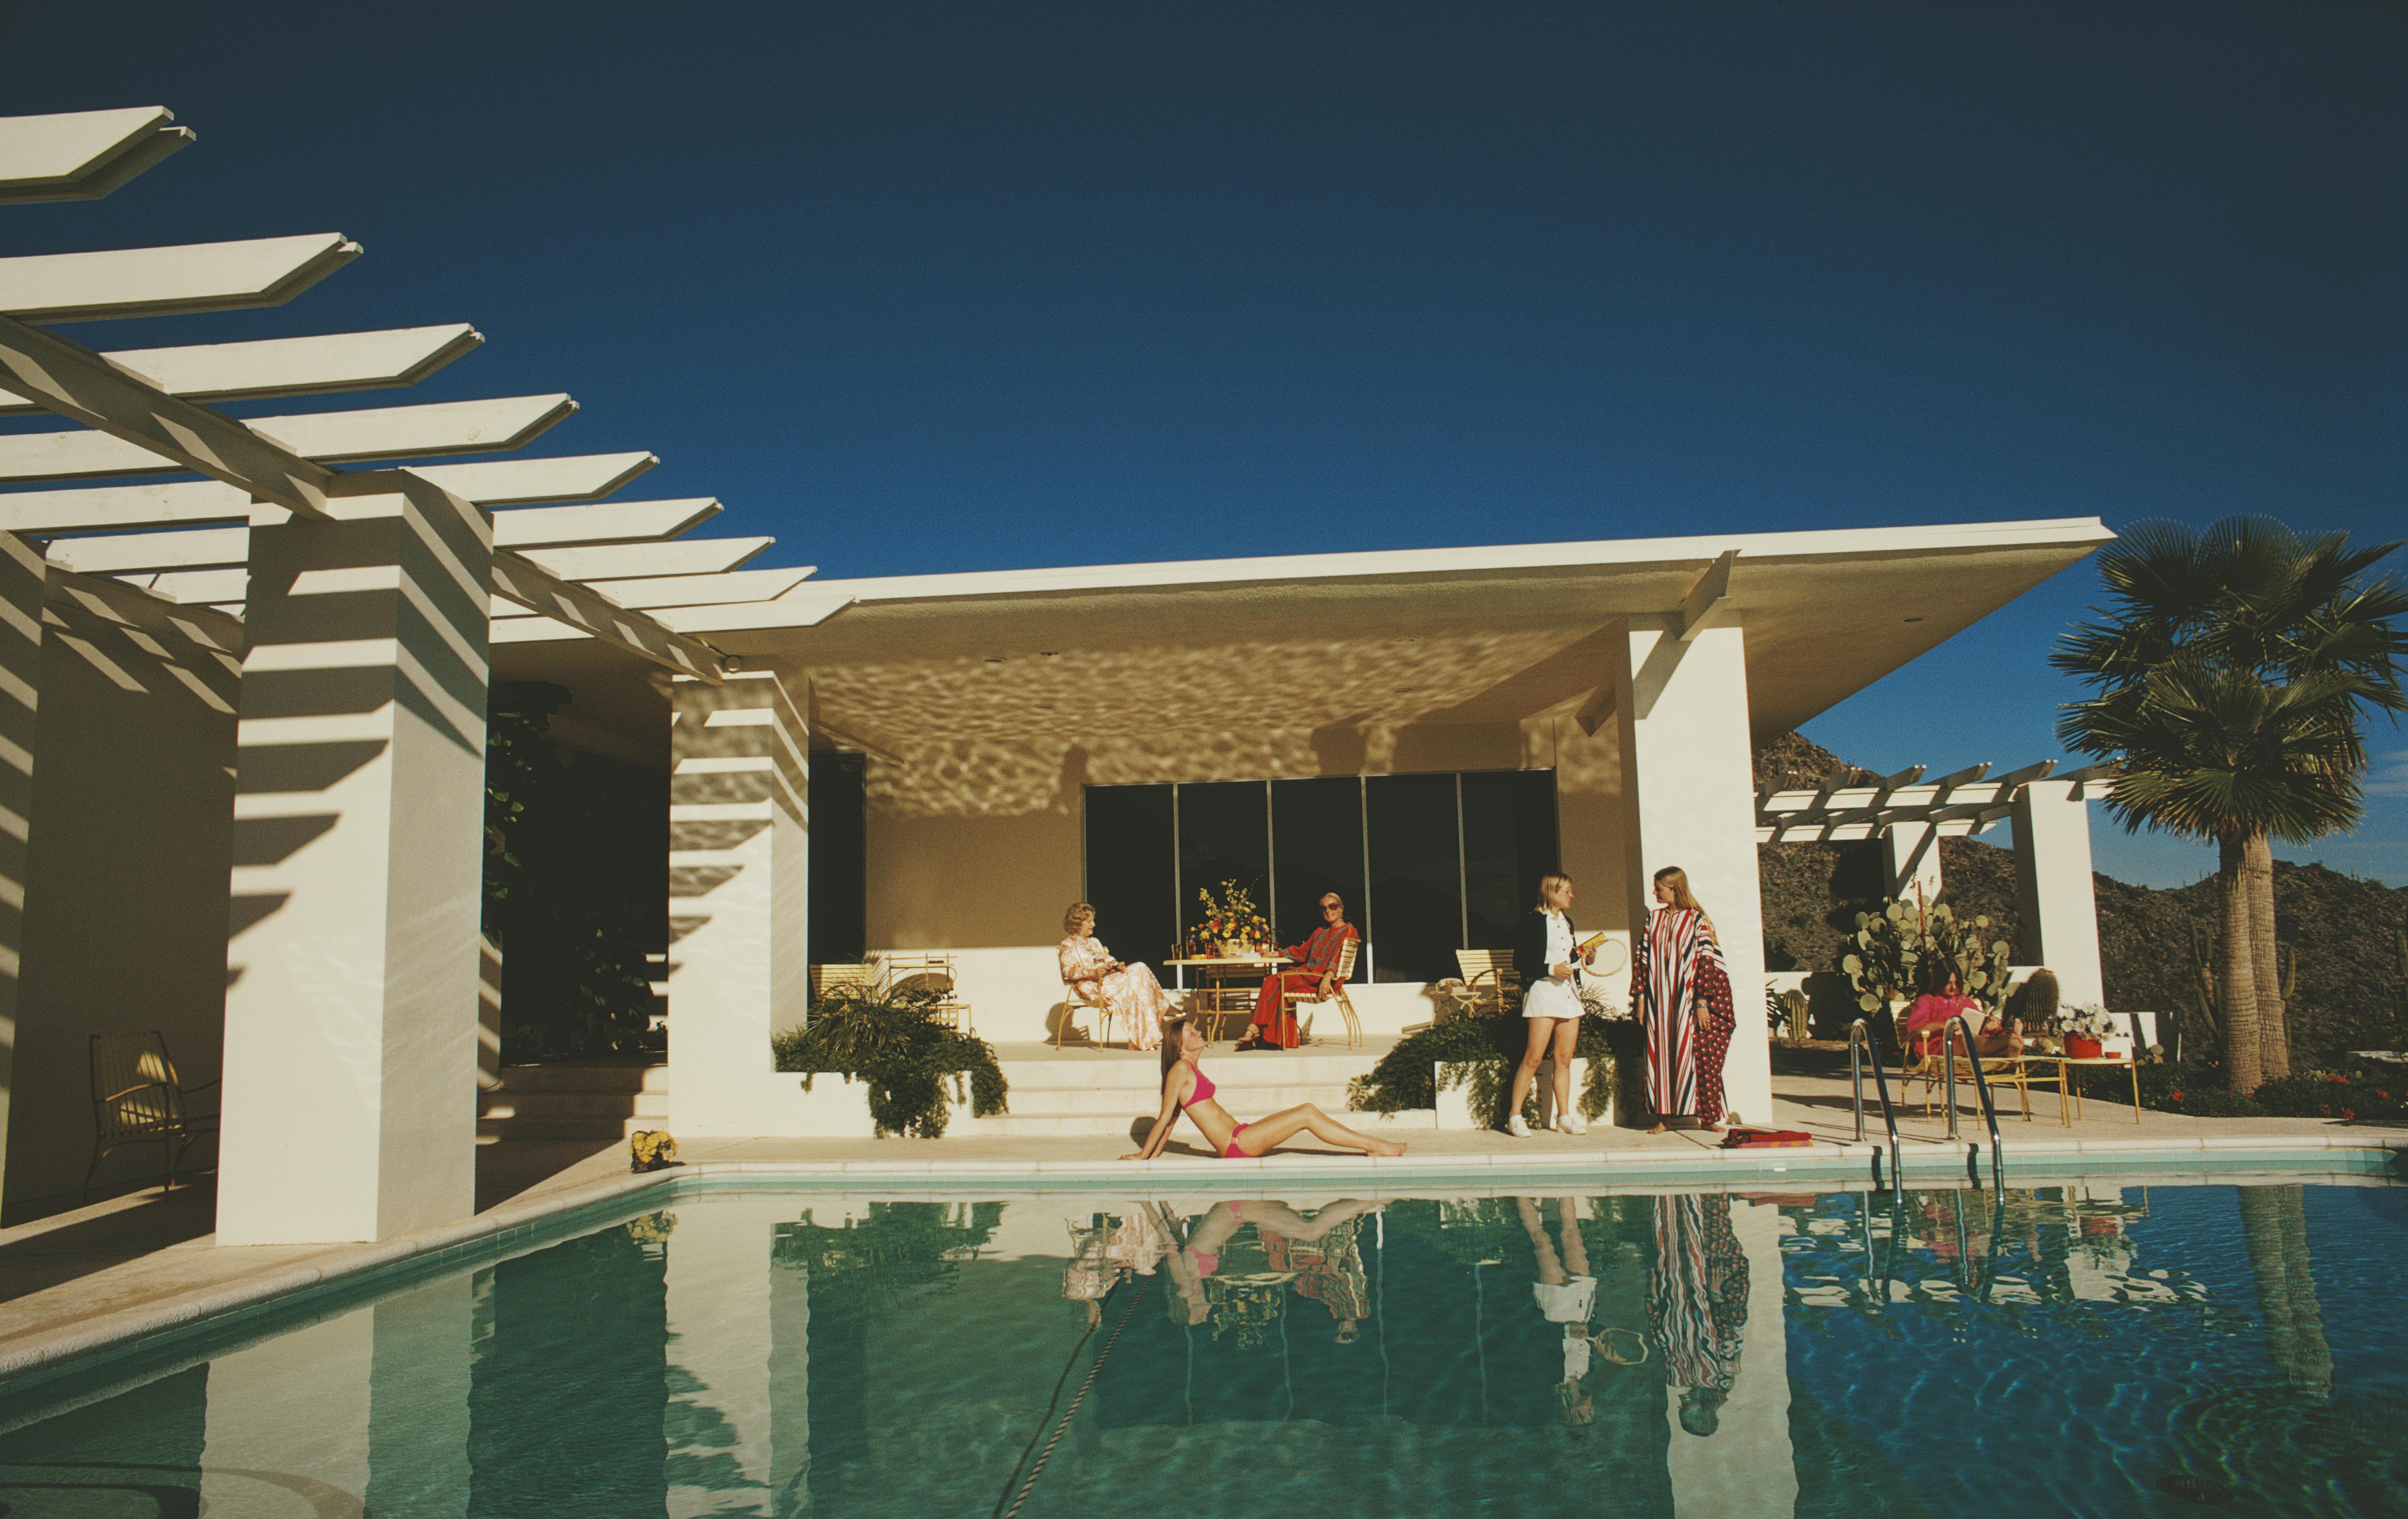 'Poolside In Arizona' 1973 Slim Aarons Limited Estate Edition Print 
Guests by the pool at the home of Wayne Beal in Scottsdale, Arizona, January 1973. 

Slim Aarons Chromogenic C print 
Printed Later 
Slim Aarons Estate Edition 
Produced utilising